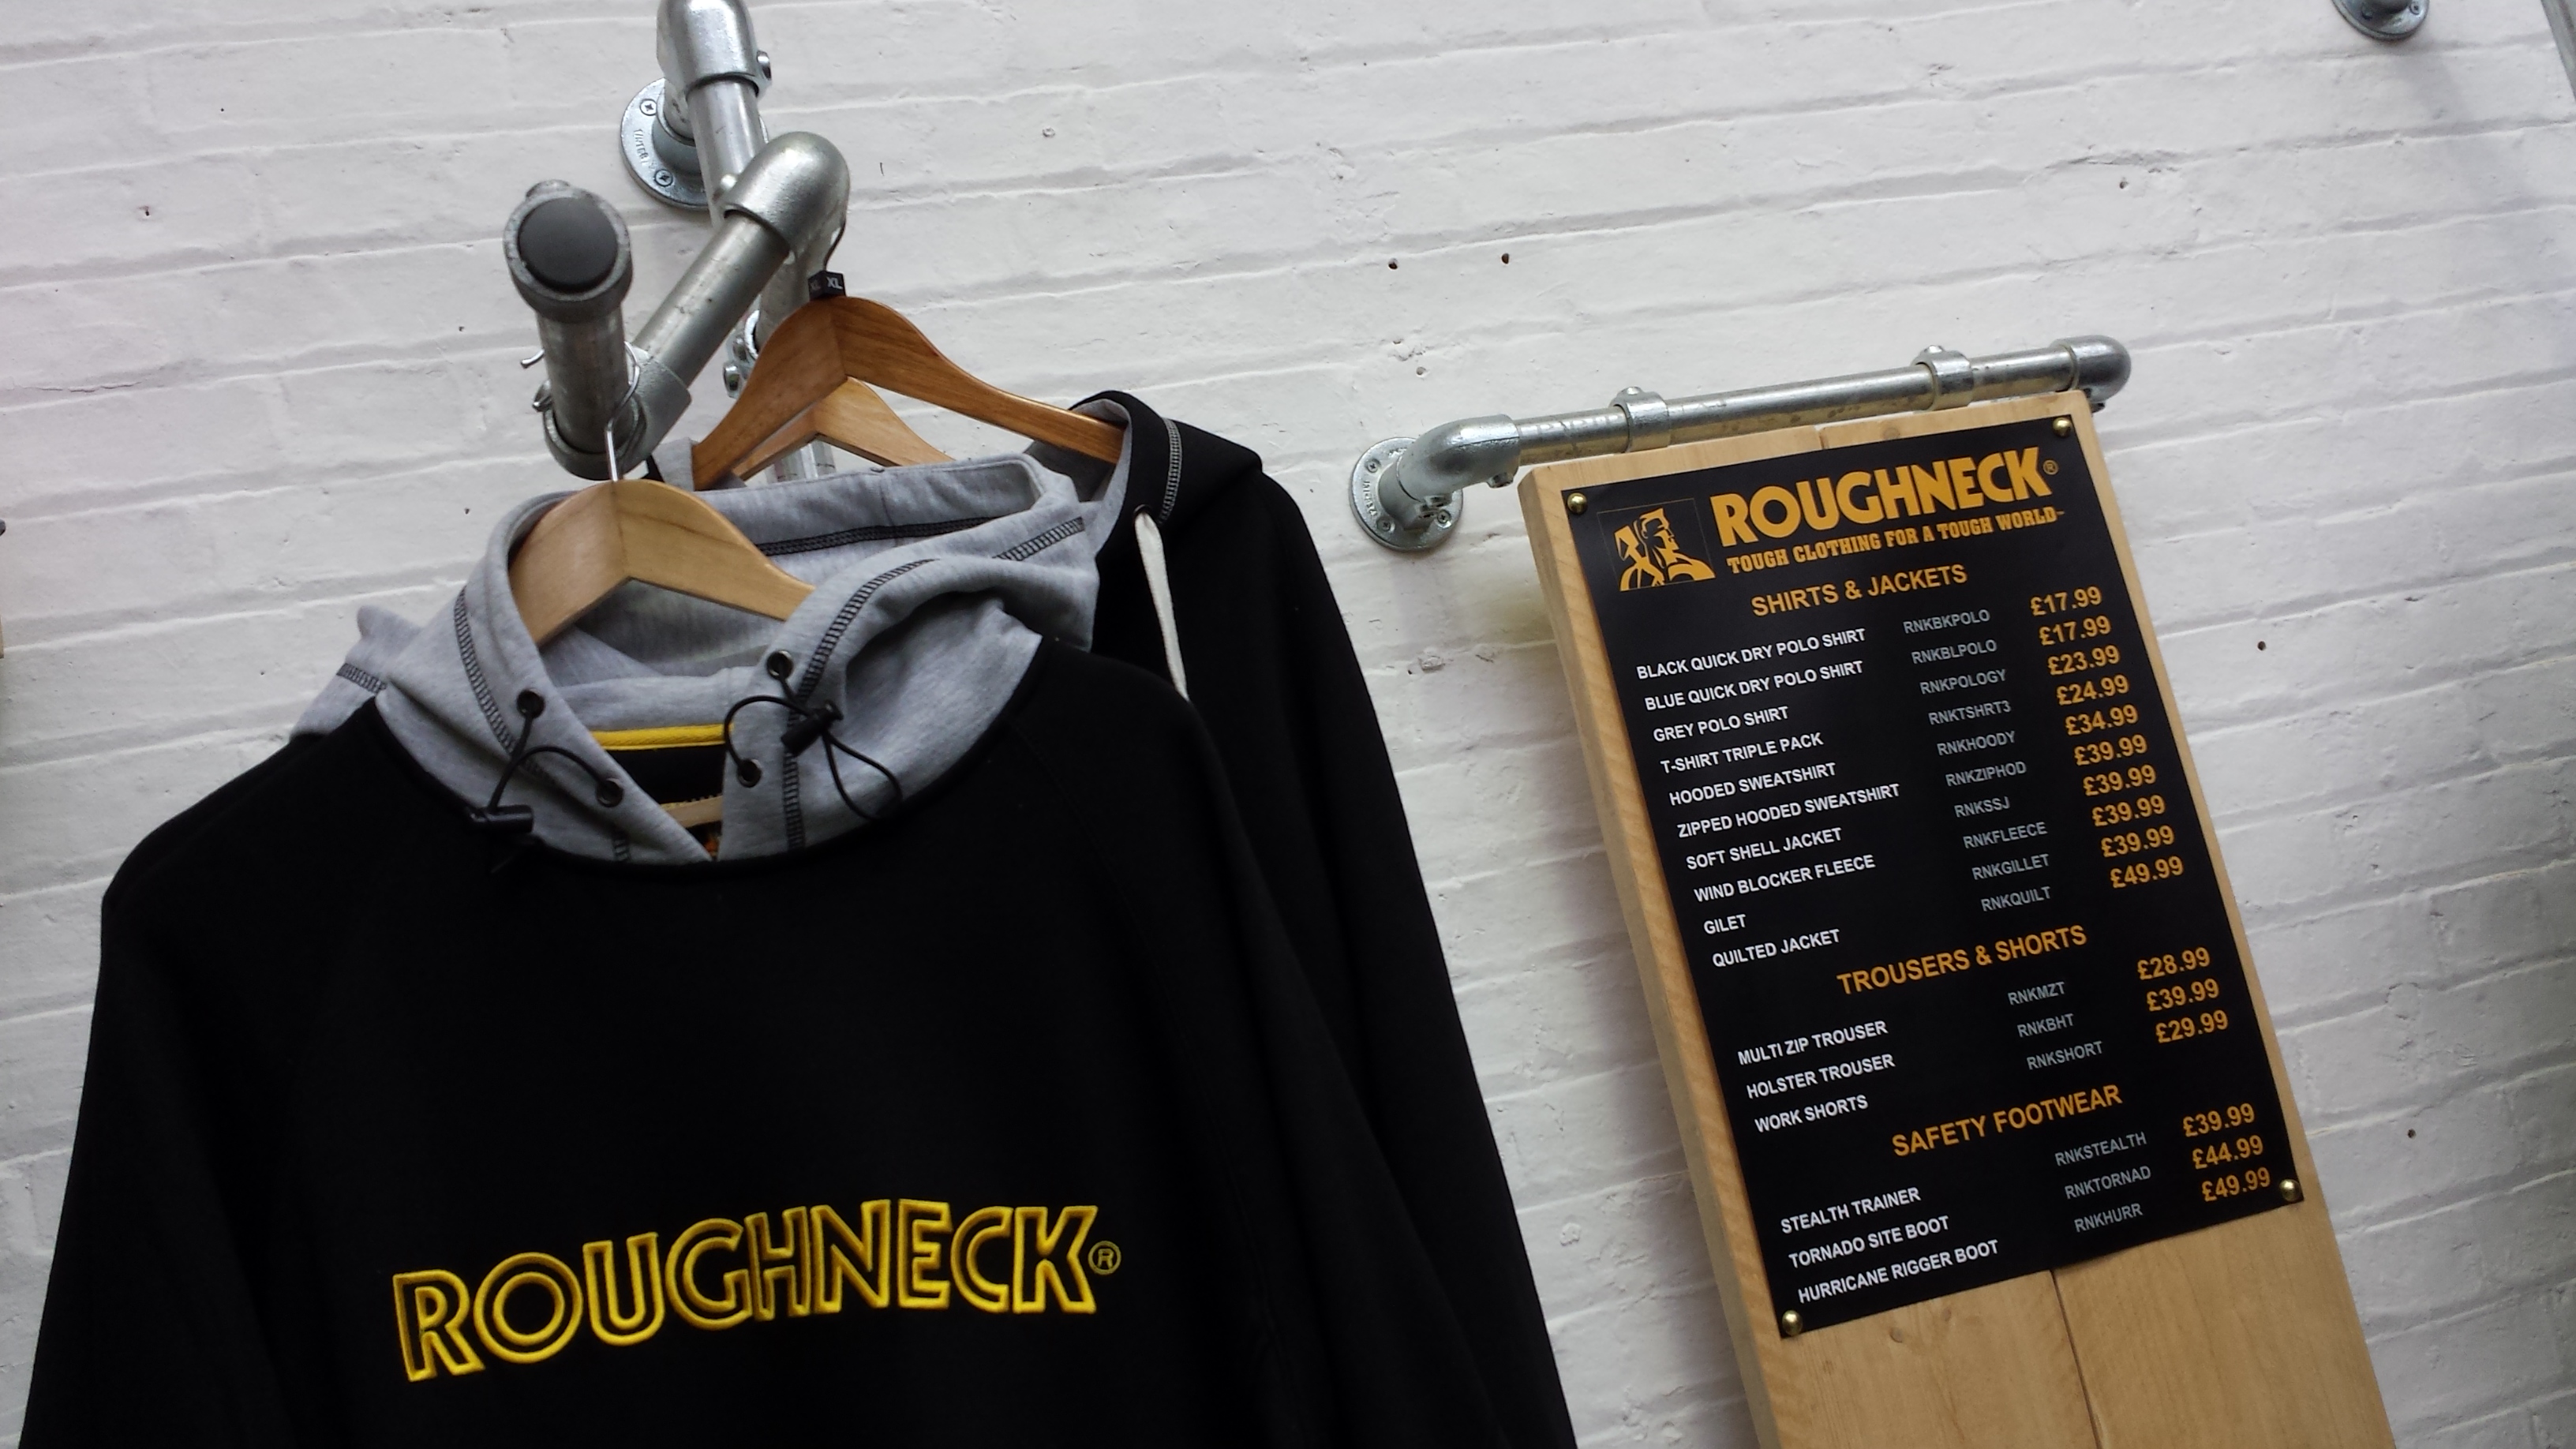 Roughneck - Our New Range of Workwear